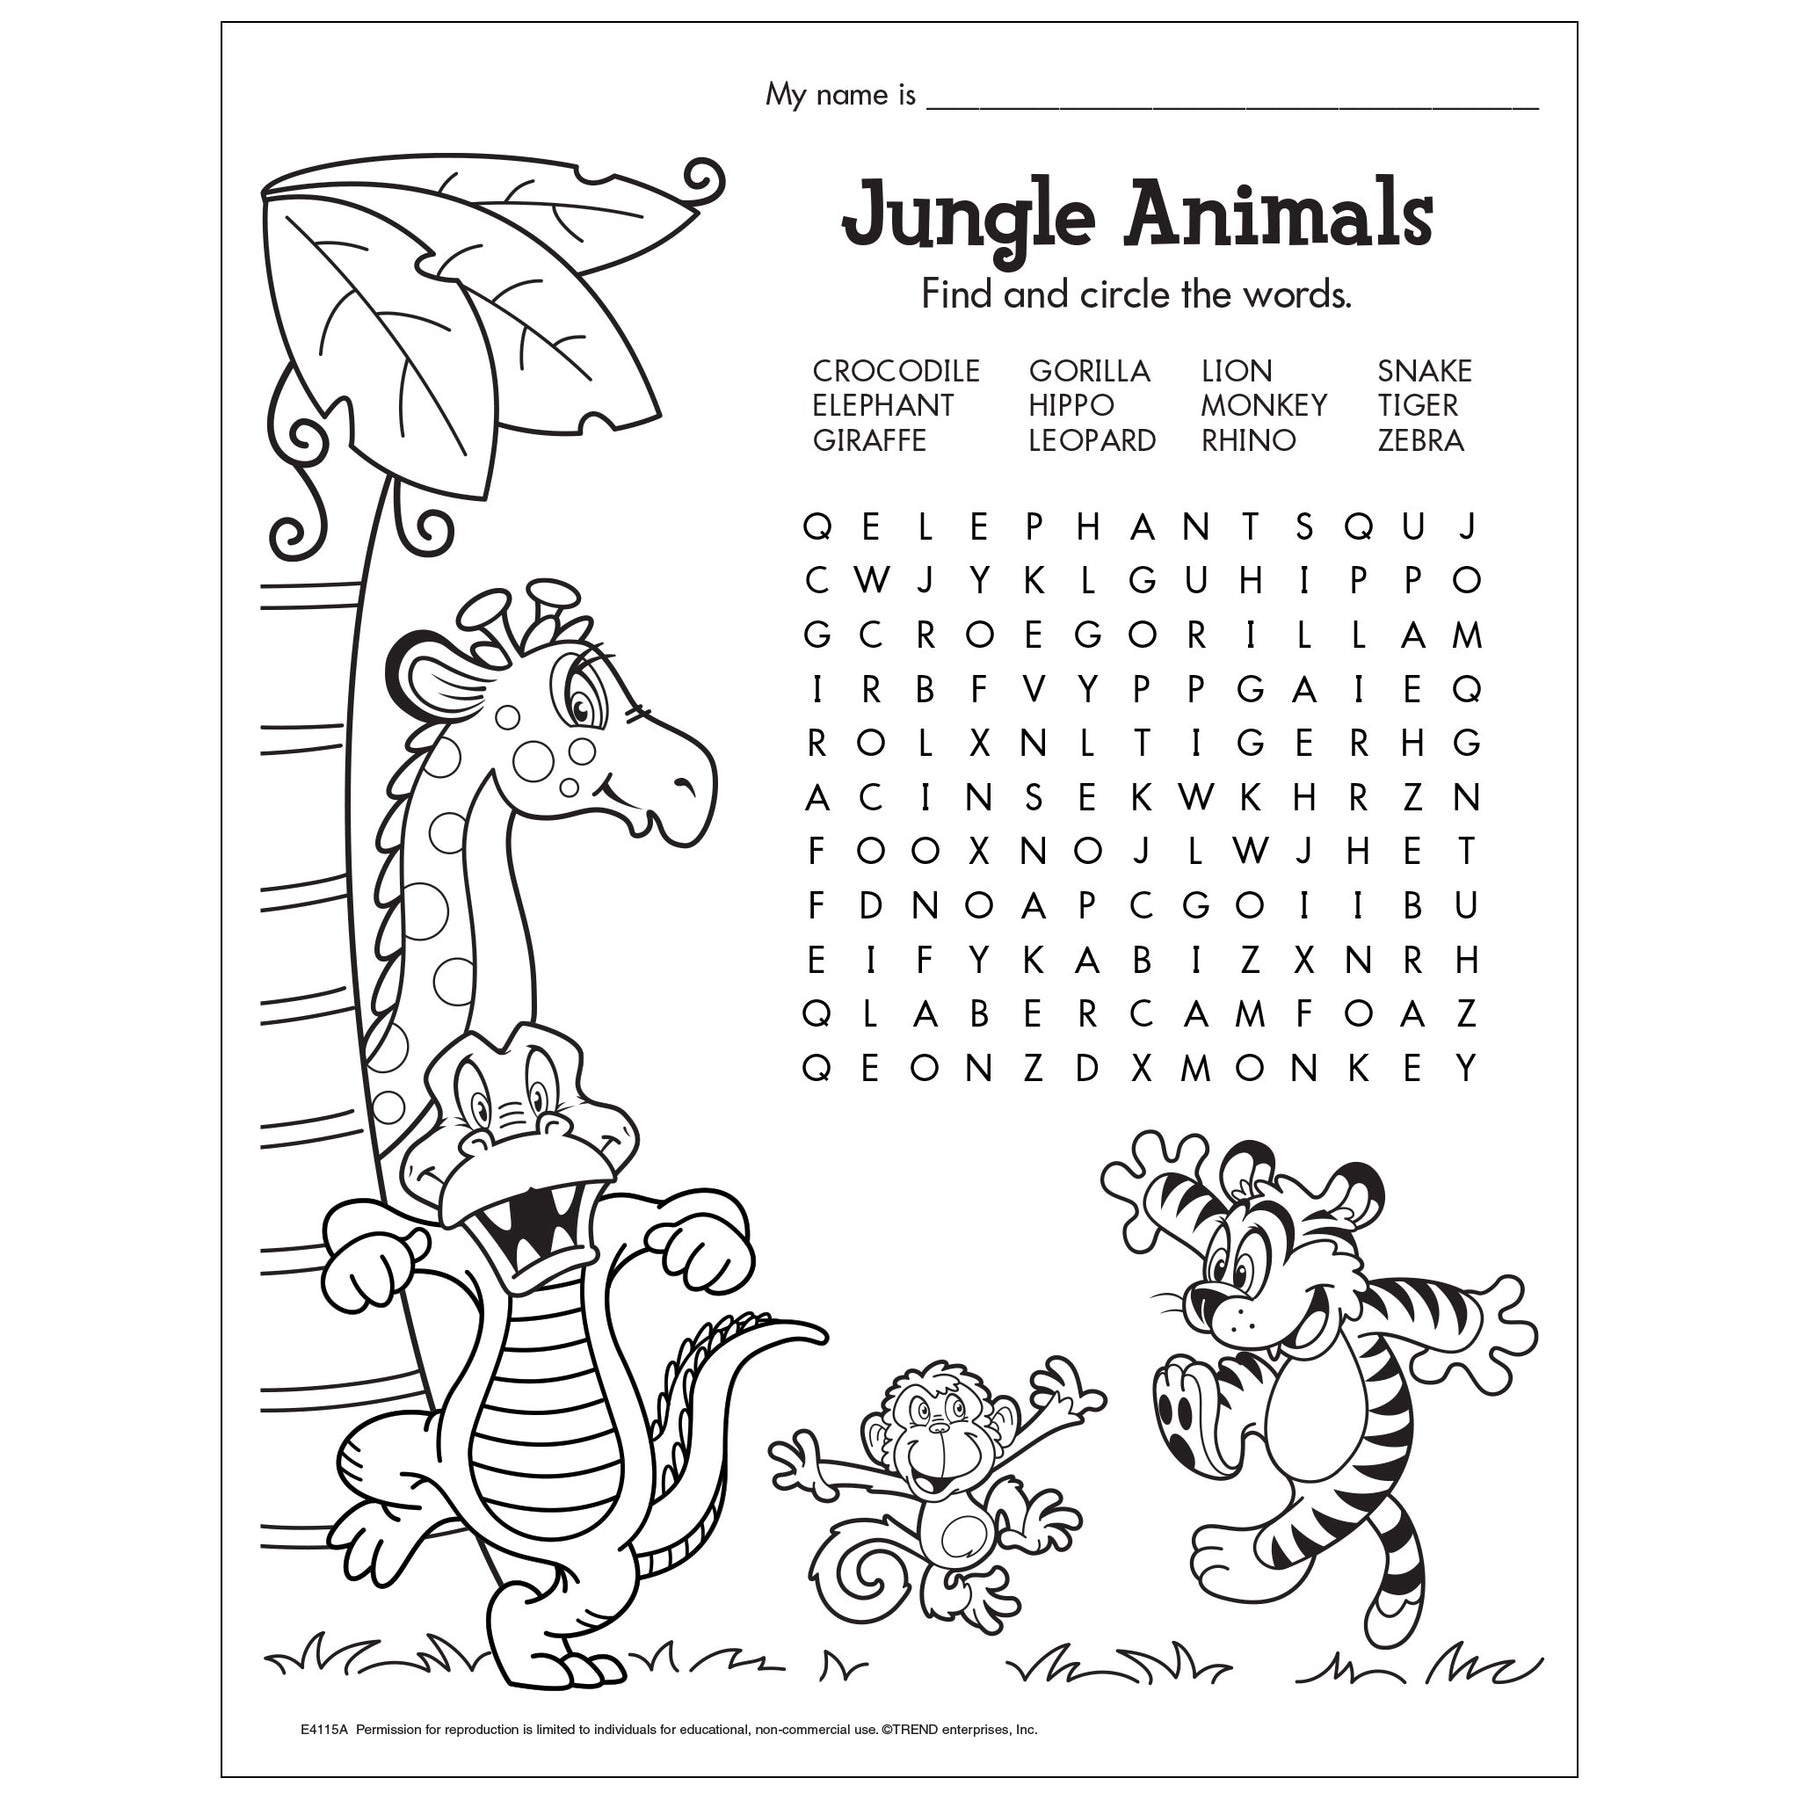 Animals (Search and Find)